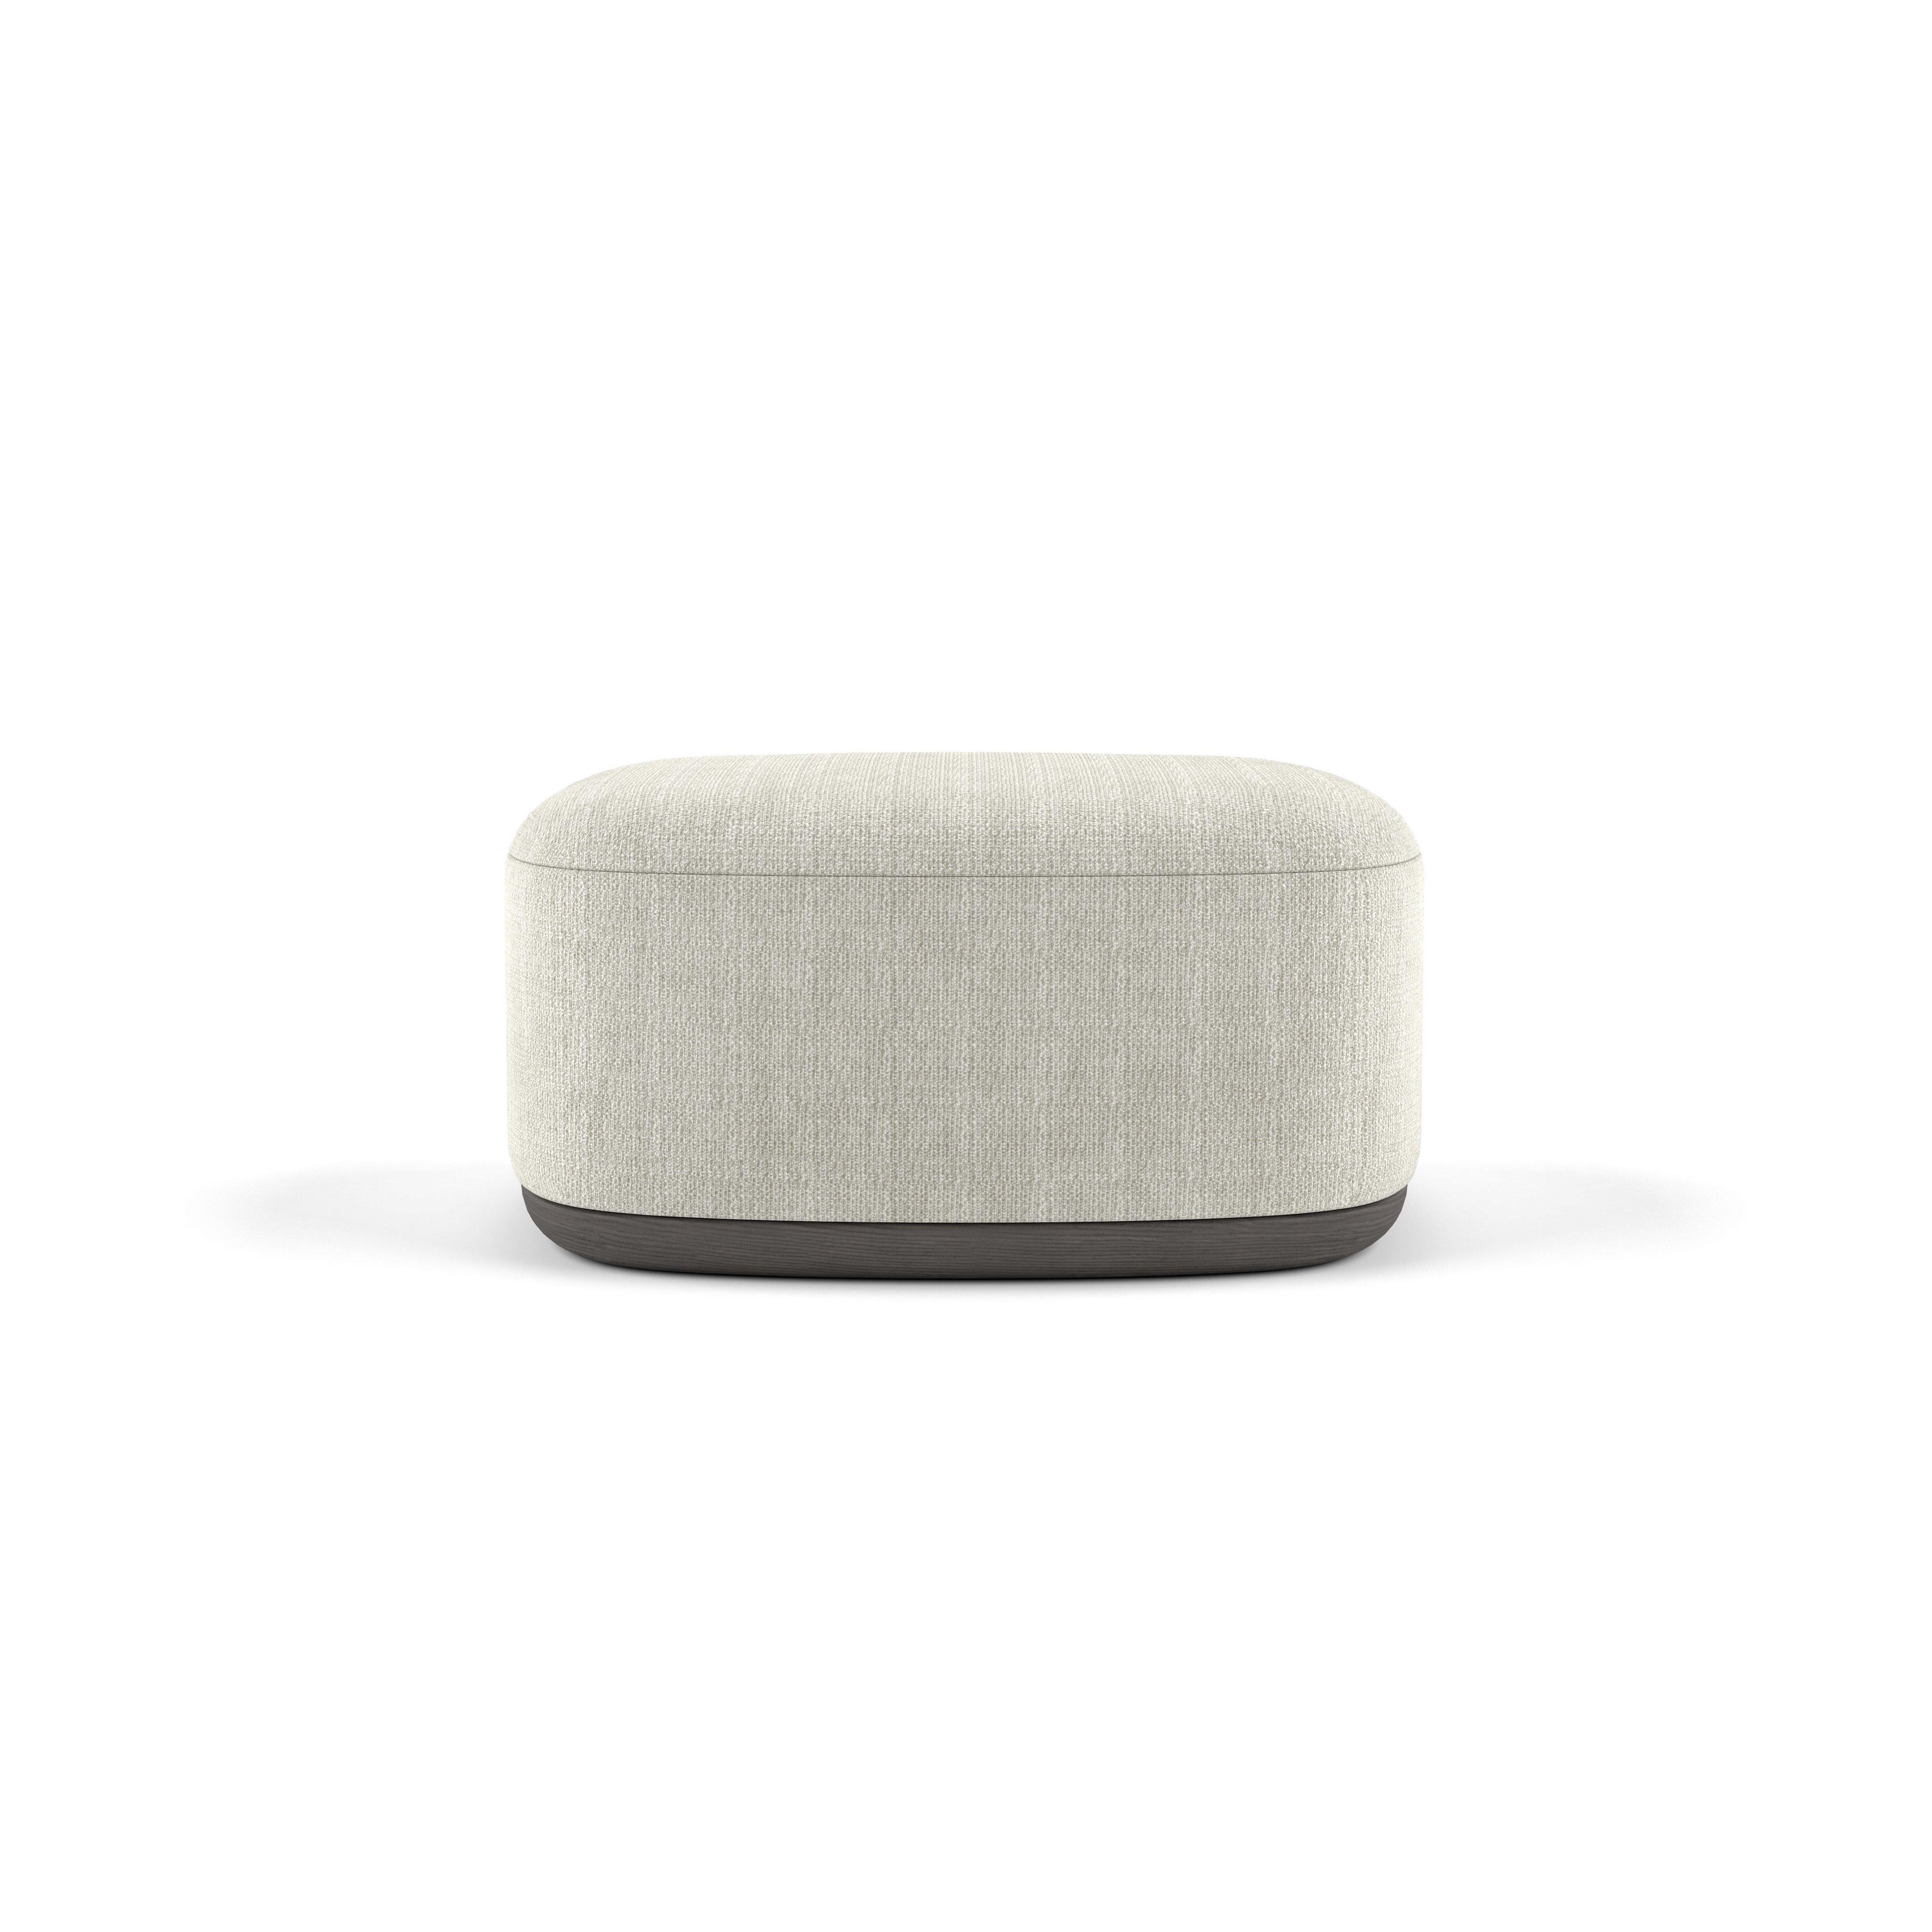 Fabric Contemporary Ottoman 'Unio' by Poiat, Hanoi 04 by Pierre Frey For Sale